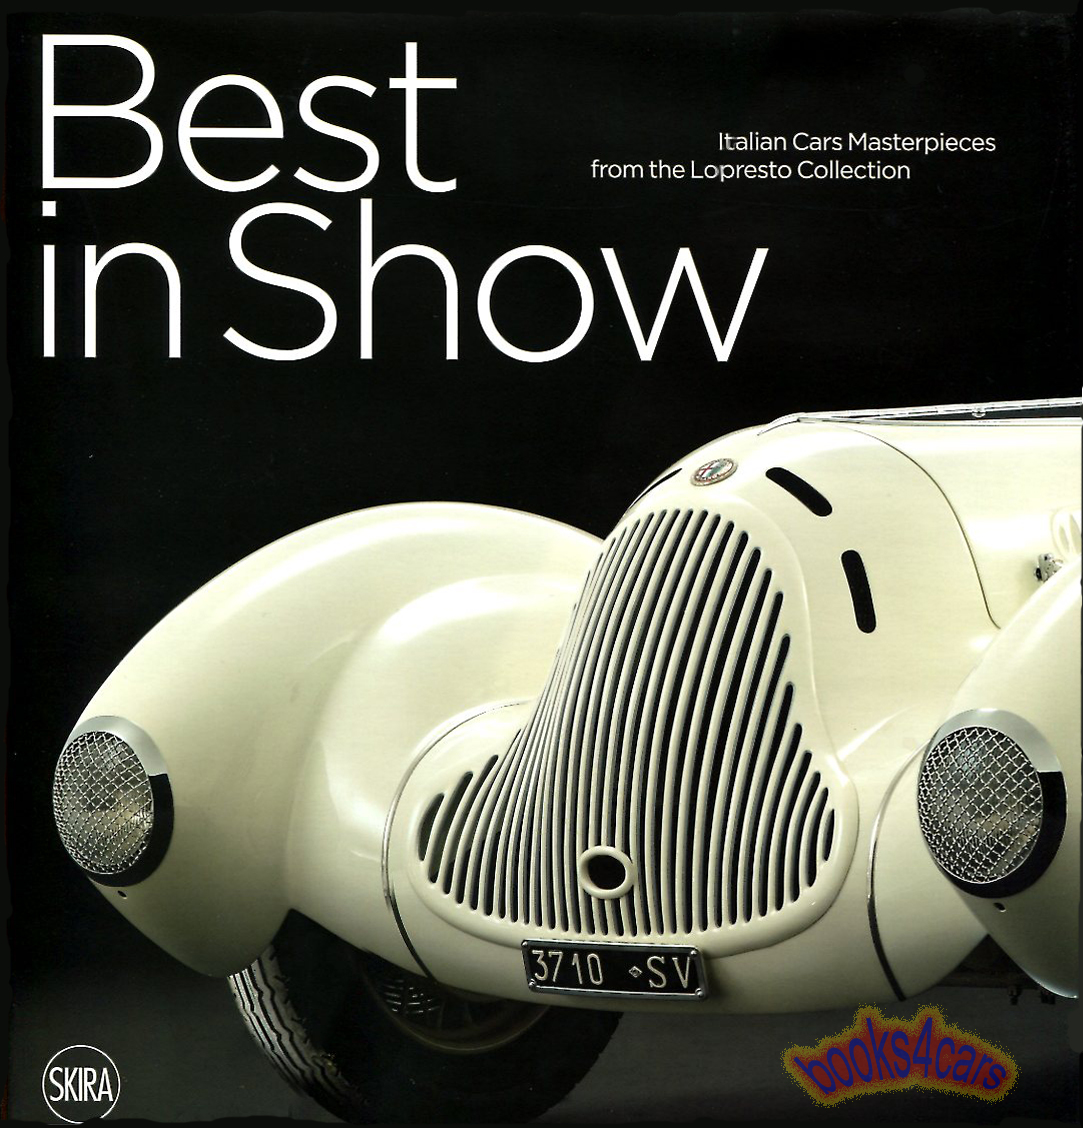 Best In Show Italian Cars Masterpieces from the Lopresto Collection hardcover 203+xii pages Large format book featuring Alfa Romeo Lancia Fiat & others